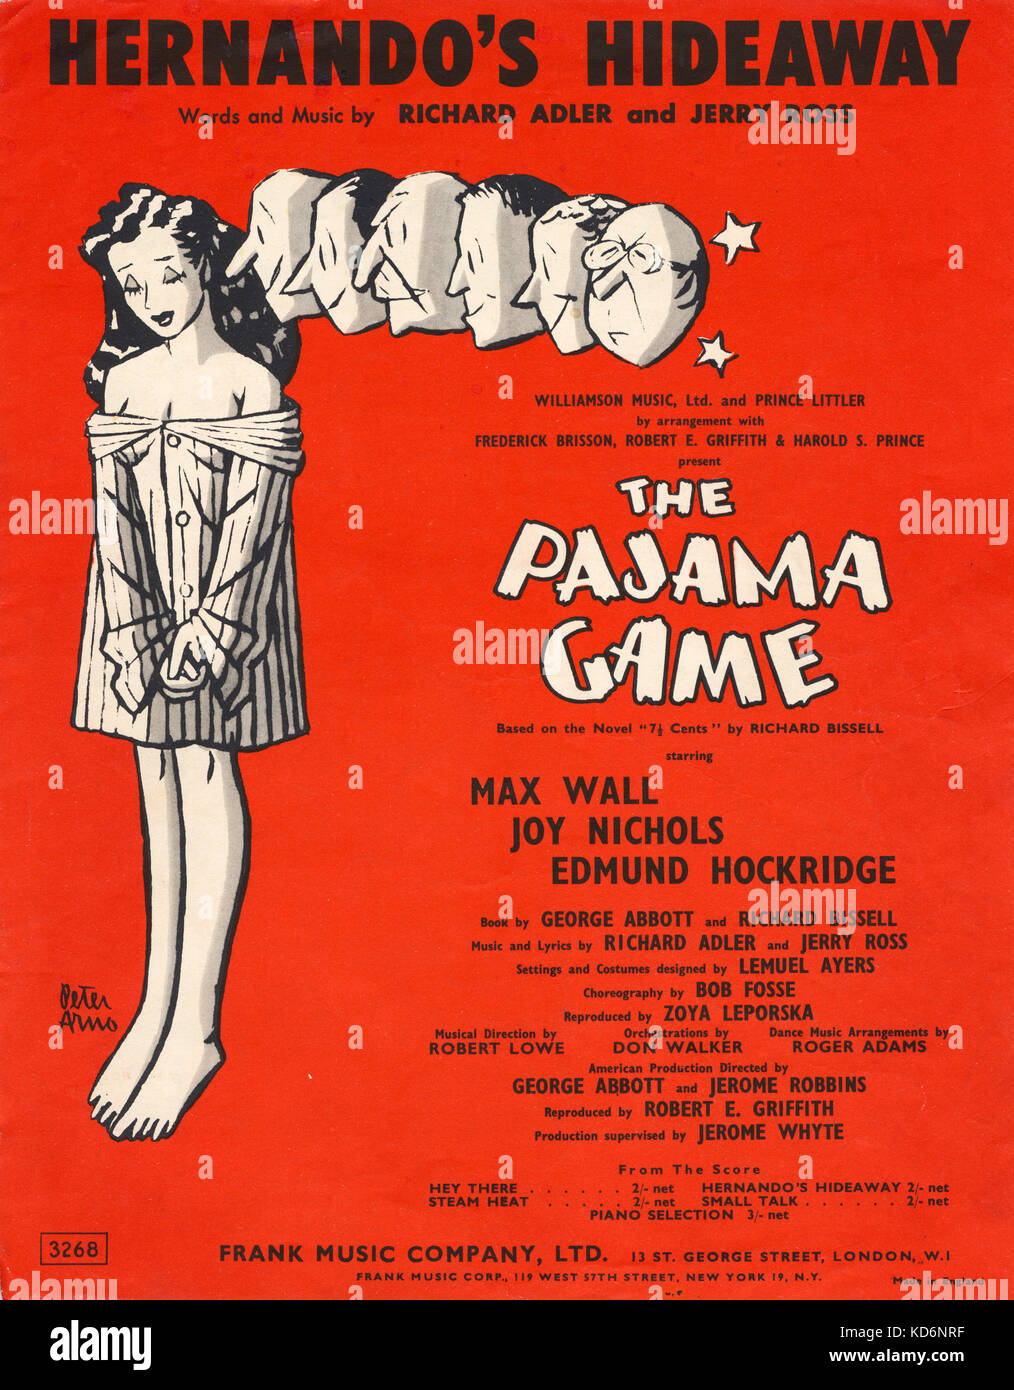 The Pajama Game,   music and lyrics by Richard Adler and Jerry Ross, choreography by Bob Fosse. Score cover of Hernando's Hideaway from the musical. Based on the novel  'Seven and a half cents'.   Published by Frank Music Company, London, 1954. Stock Photo